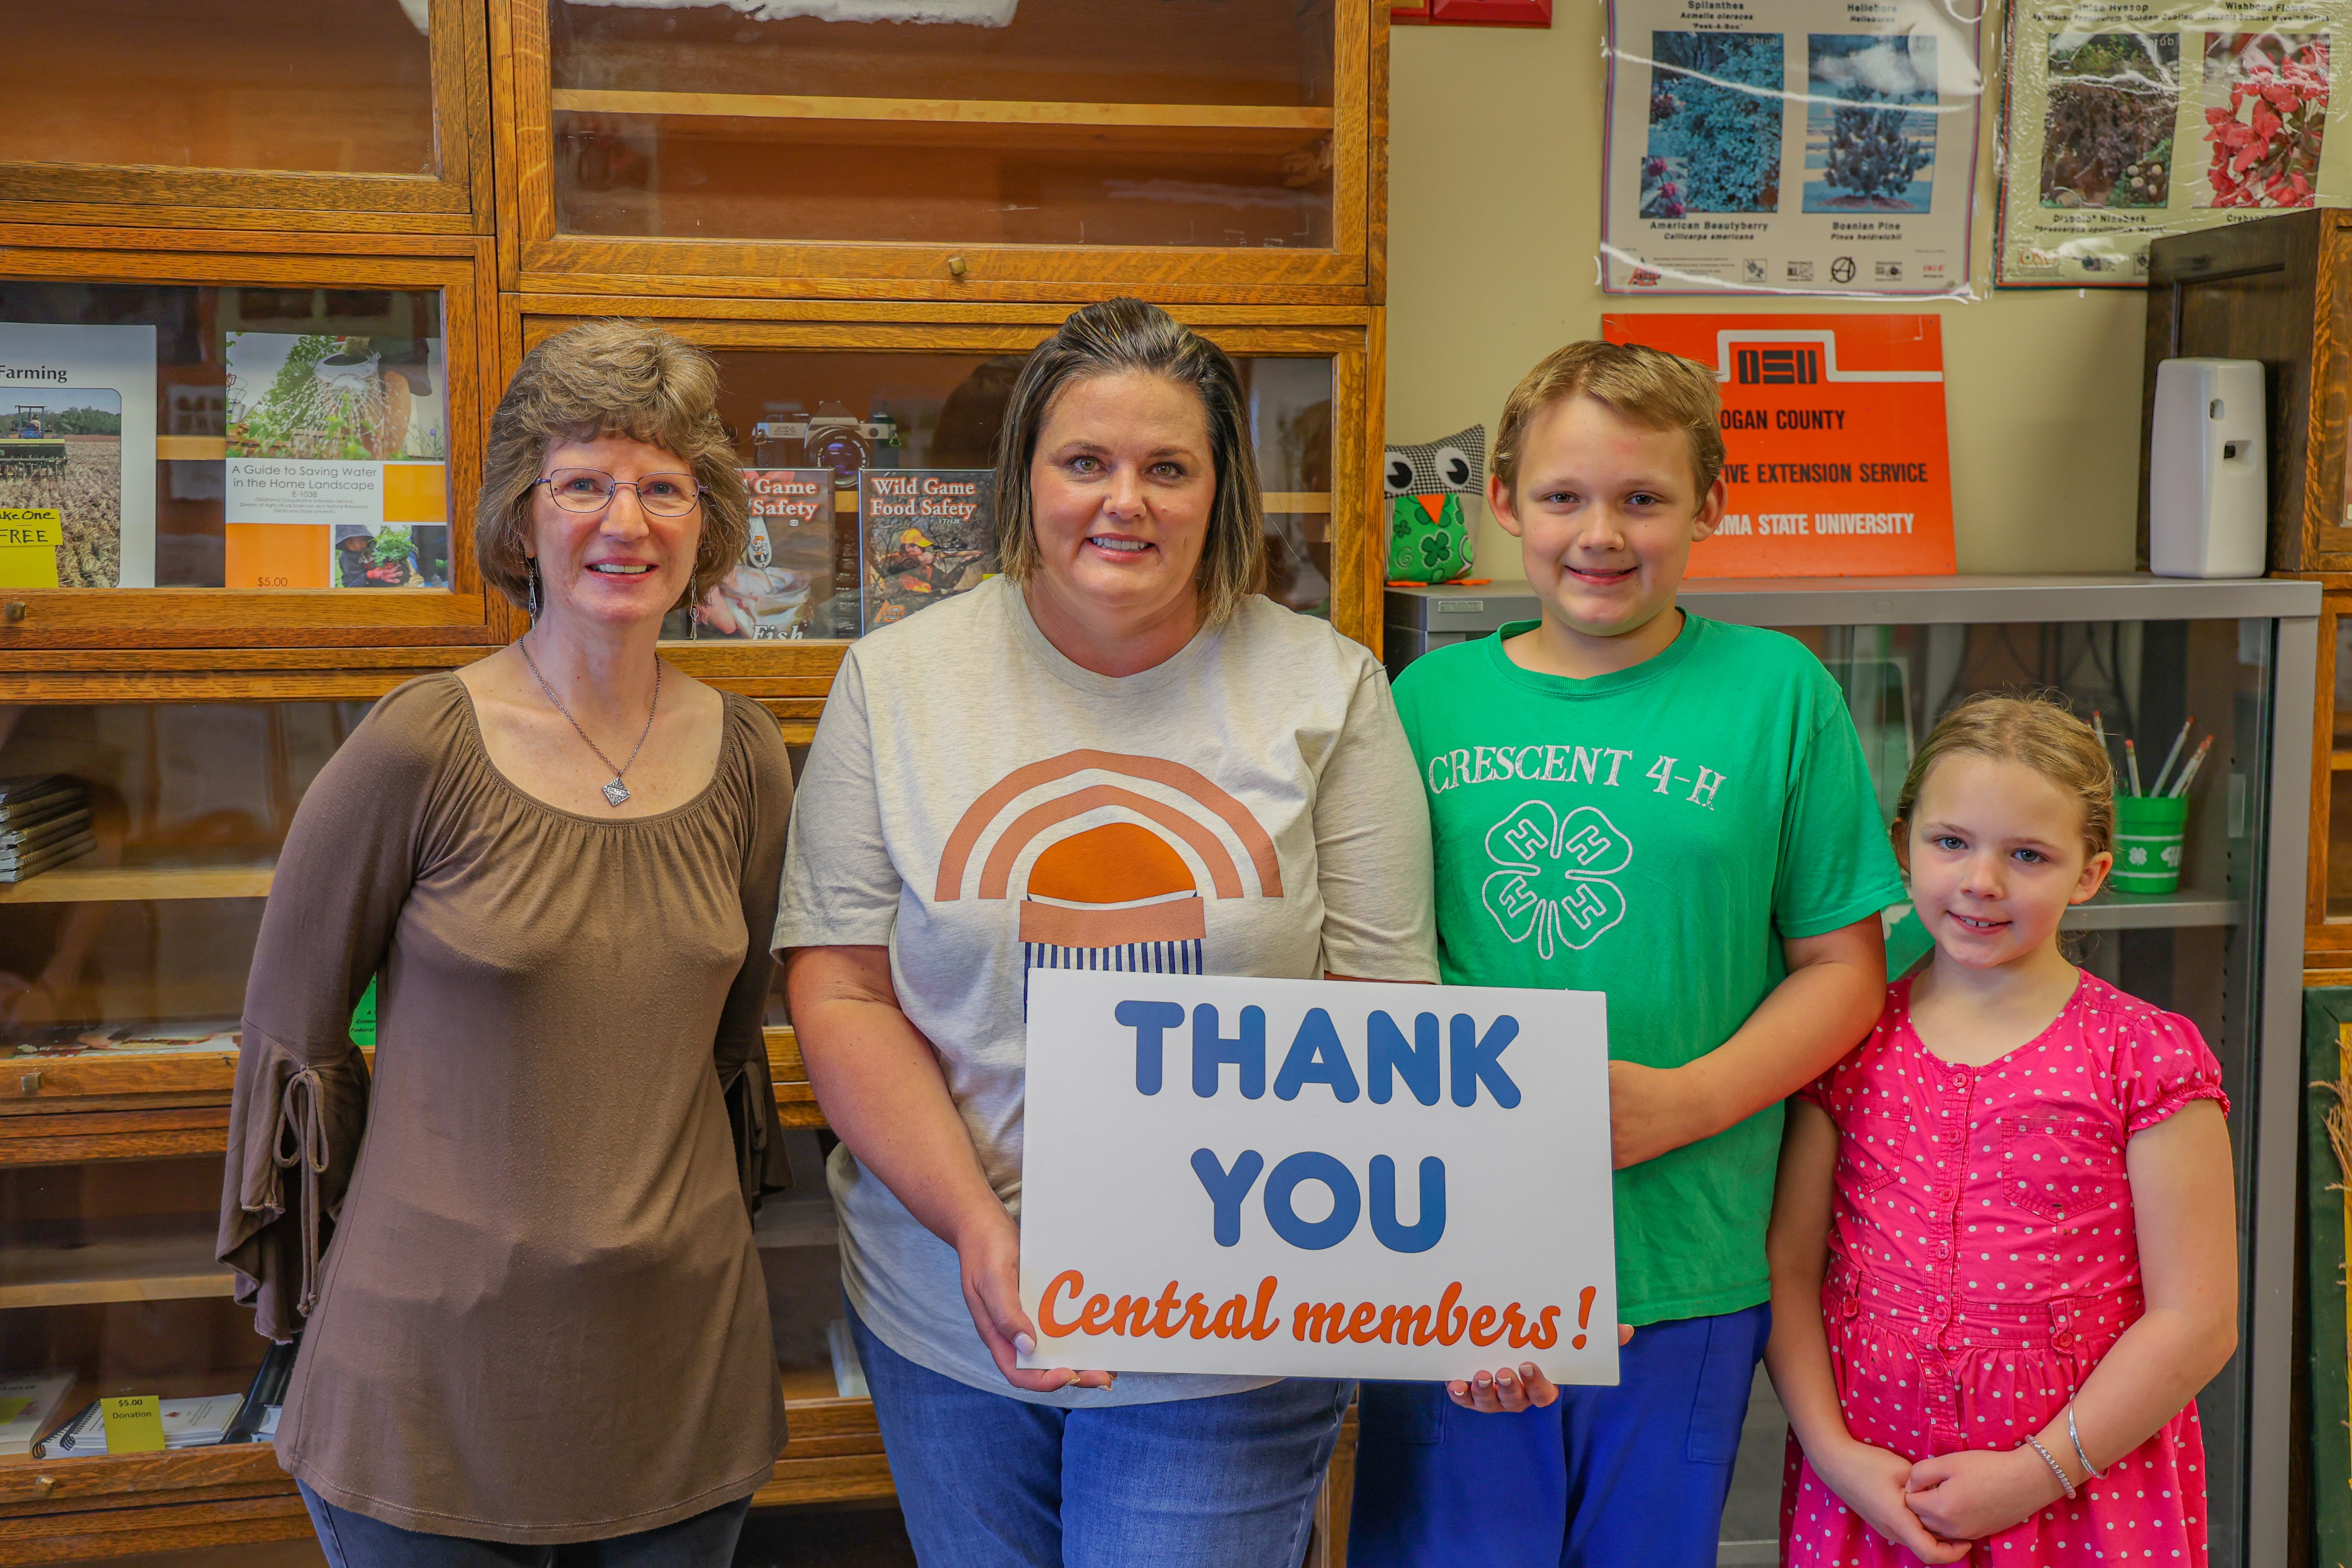 Central District four Trustee, Sid Sperry, presents 4-H Robotics Club leader Jennifer Dejonge; robotics club member Patrick Reinert, cloverbud member Jacqueline Reinert, and FCS/4-H Educator Dawn Andrew with a grant from the Central Community Foundation.